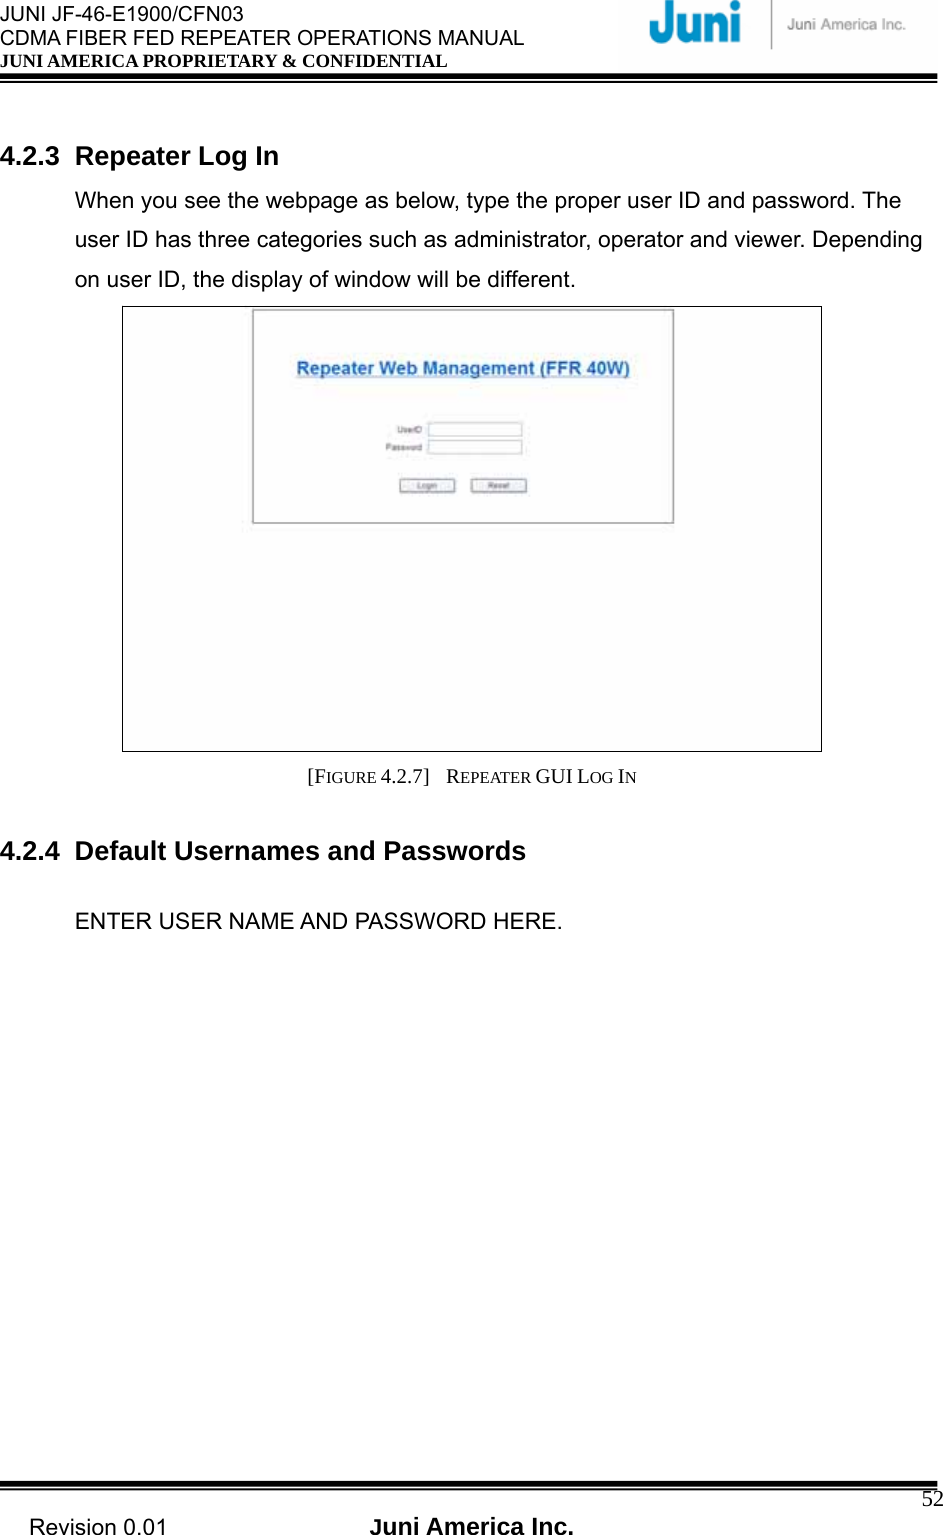  JUNI JF-46-E1900/CFN03 CDMA FIBER FED REPEATER OPERATIONS MANUAL JUNI AMERICA PROPRIETARY &amp; CONFIDENTIAL                                   Revision 0.01  Juni America Inc.  52 4.2.3 Repeater Log In When you see the webpage as below, type the proper user ID and password. The user ID has three categories such as administrator, operator and viewer. Depending on user ID, the display of window will be different.  [FIGURE 4.2.7]  REPEATER GUI LOG IN  4.2.4 Default Usernames and Passwords  ENTER USER NAME AND PASSWORD HERE. 